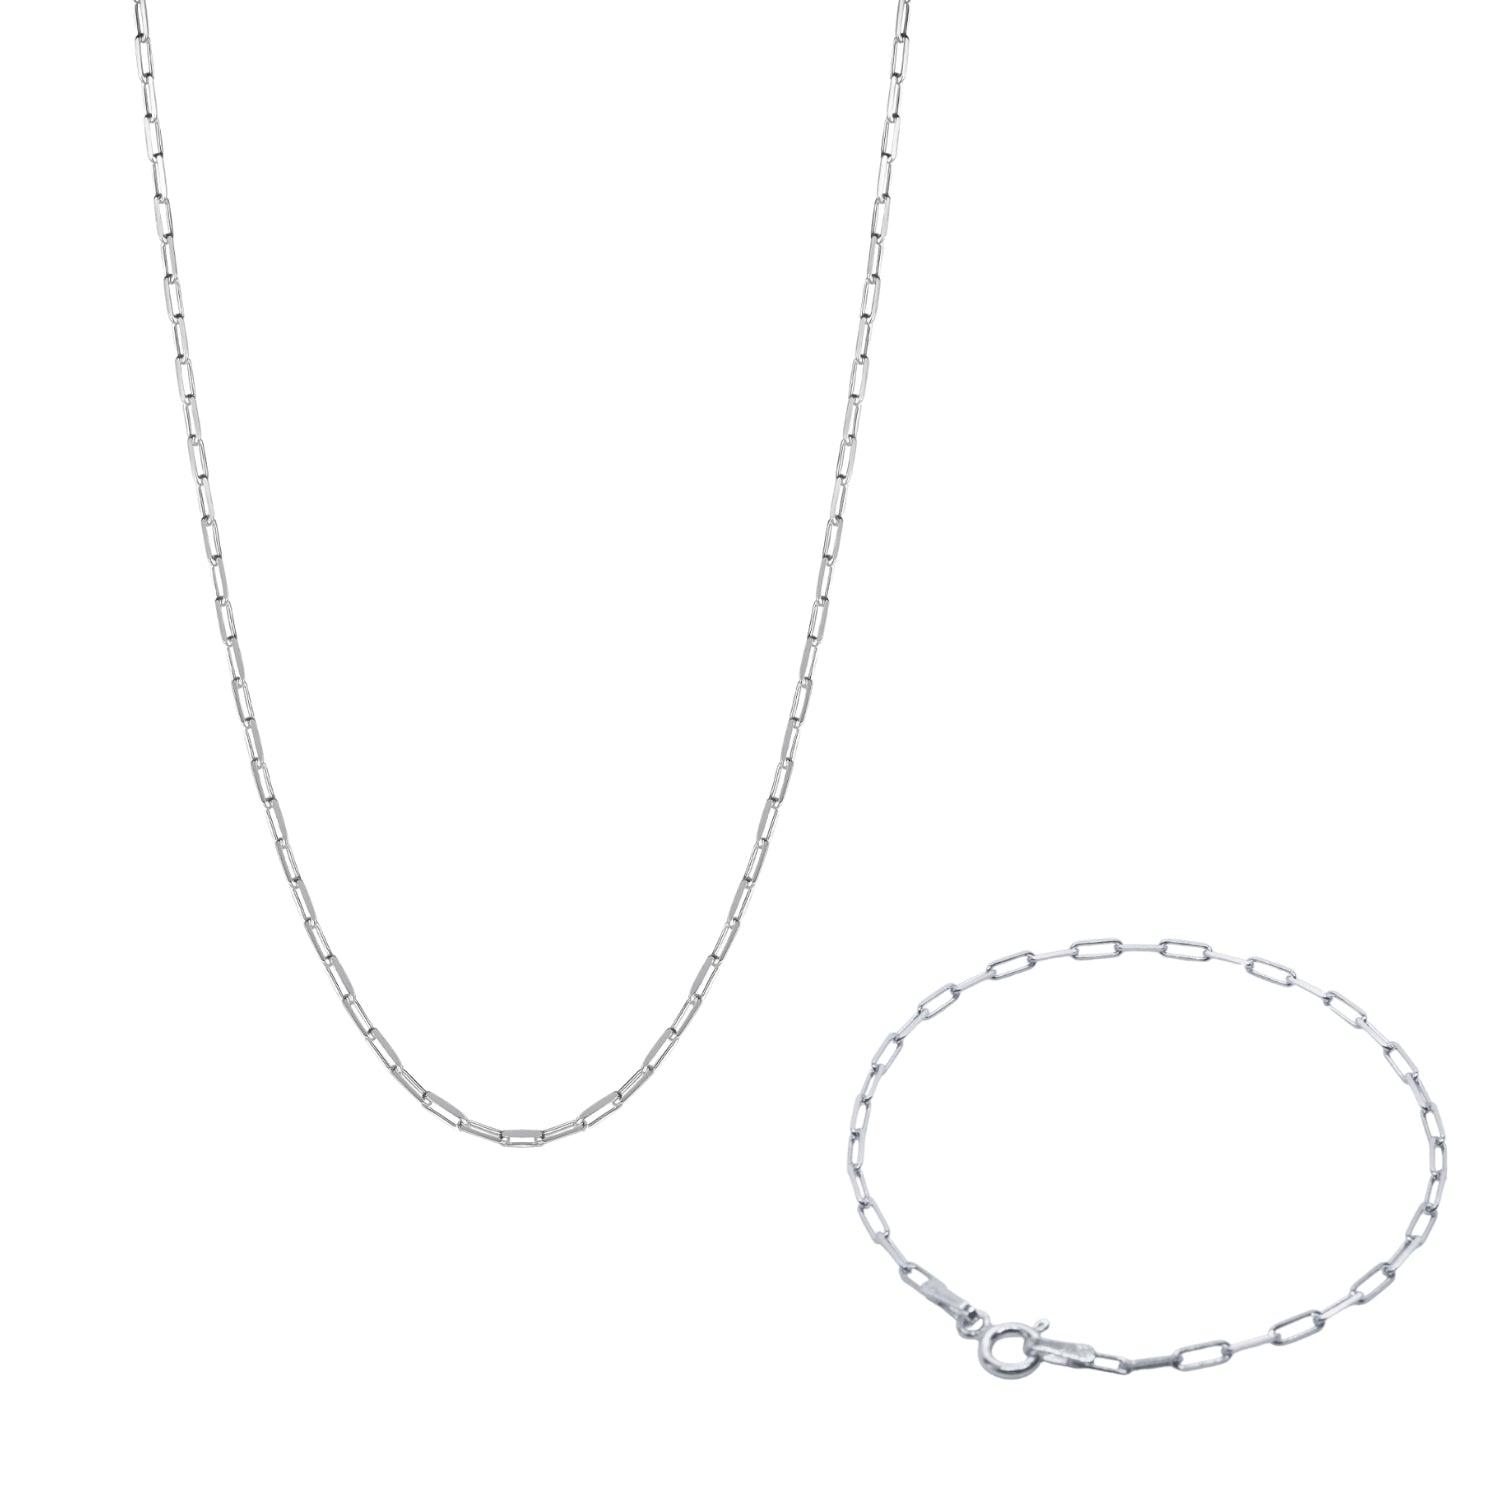 Rectangular Sterling Silver Chain Bracelet and Necklace Set